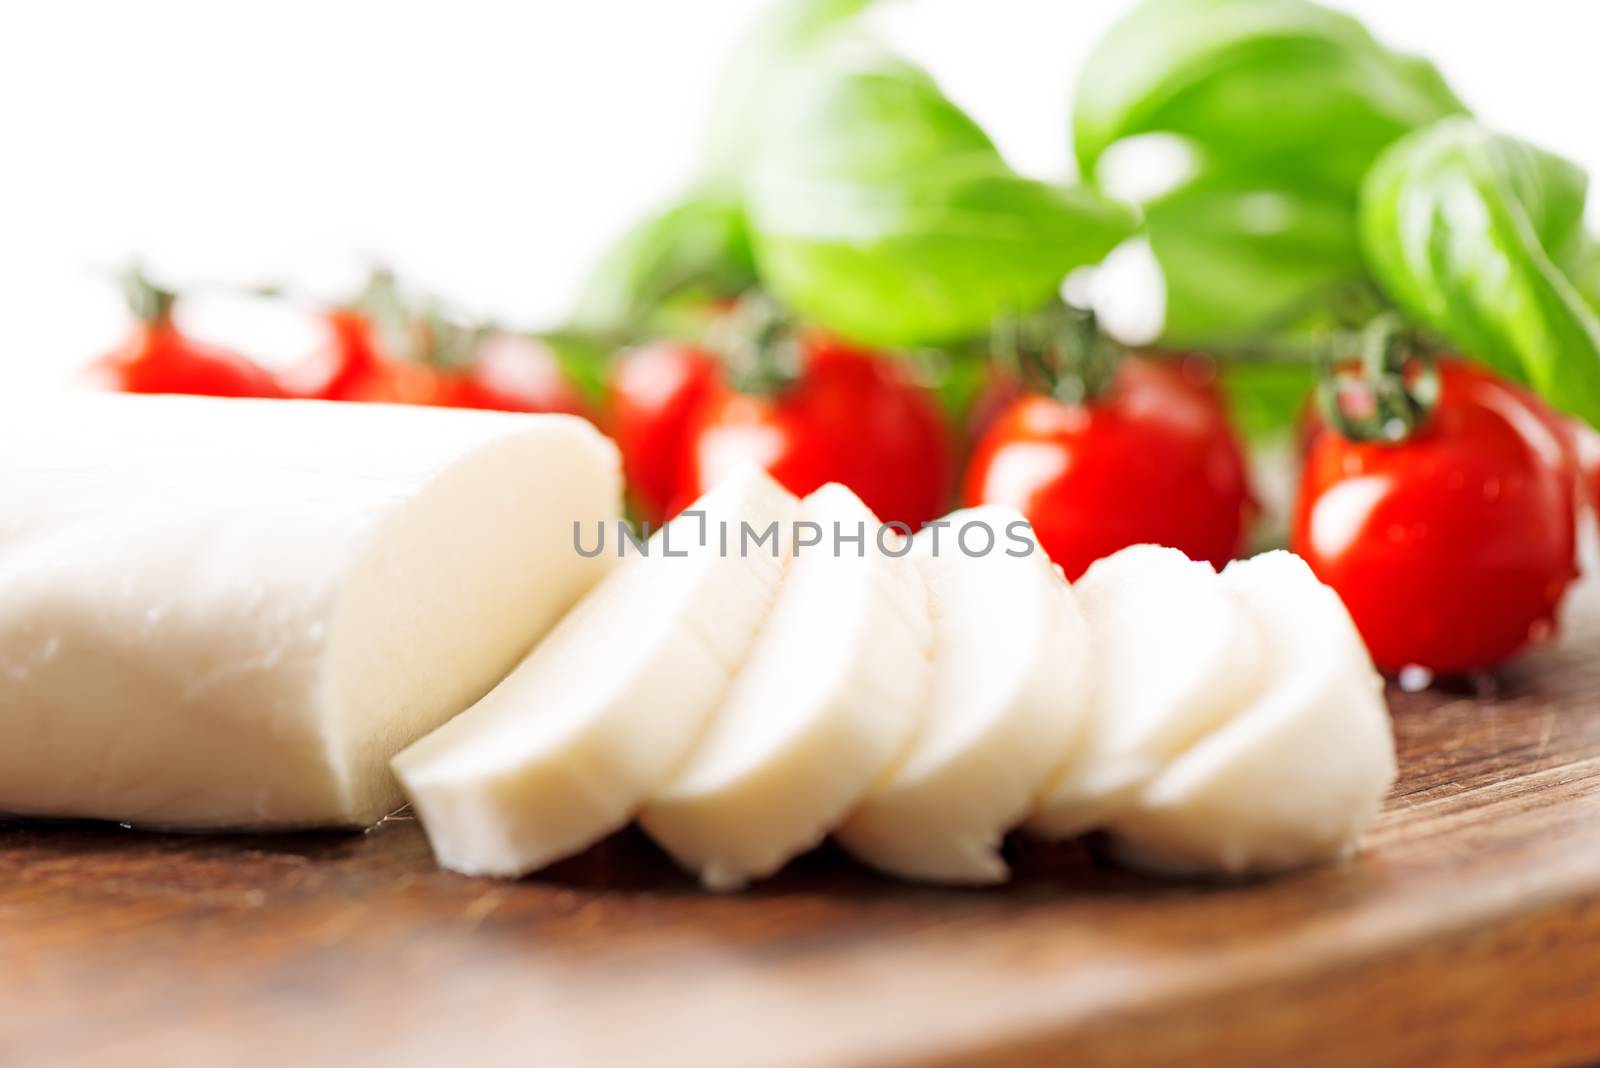 Ingredients for Caprese salad with mozzarella, tomato, basil and balsamic vinegar arranged on wooden table